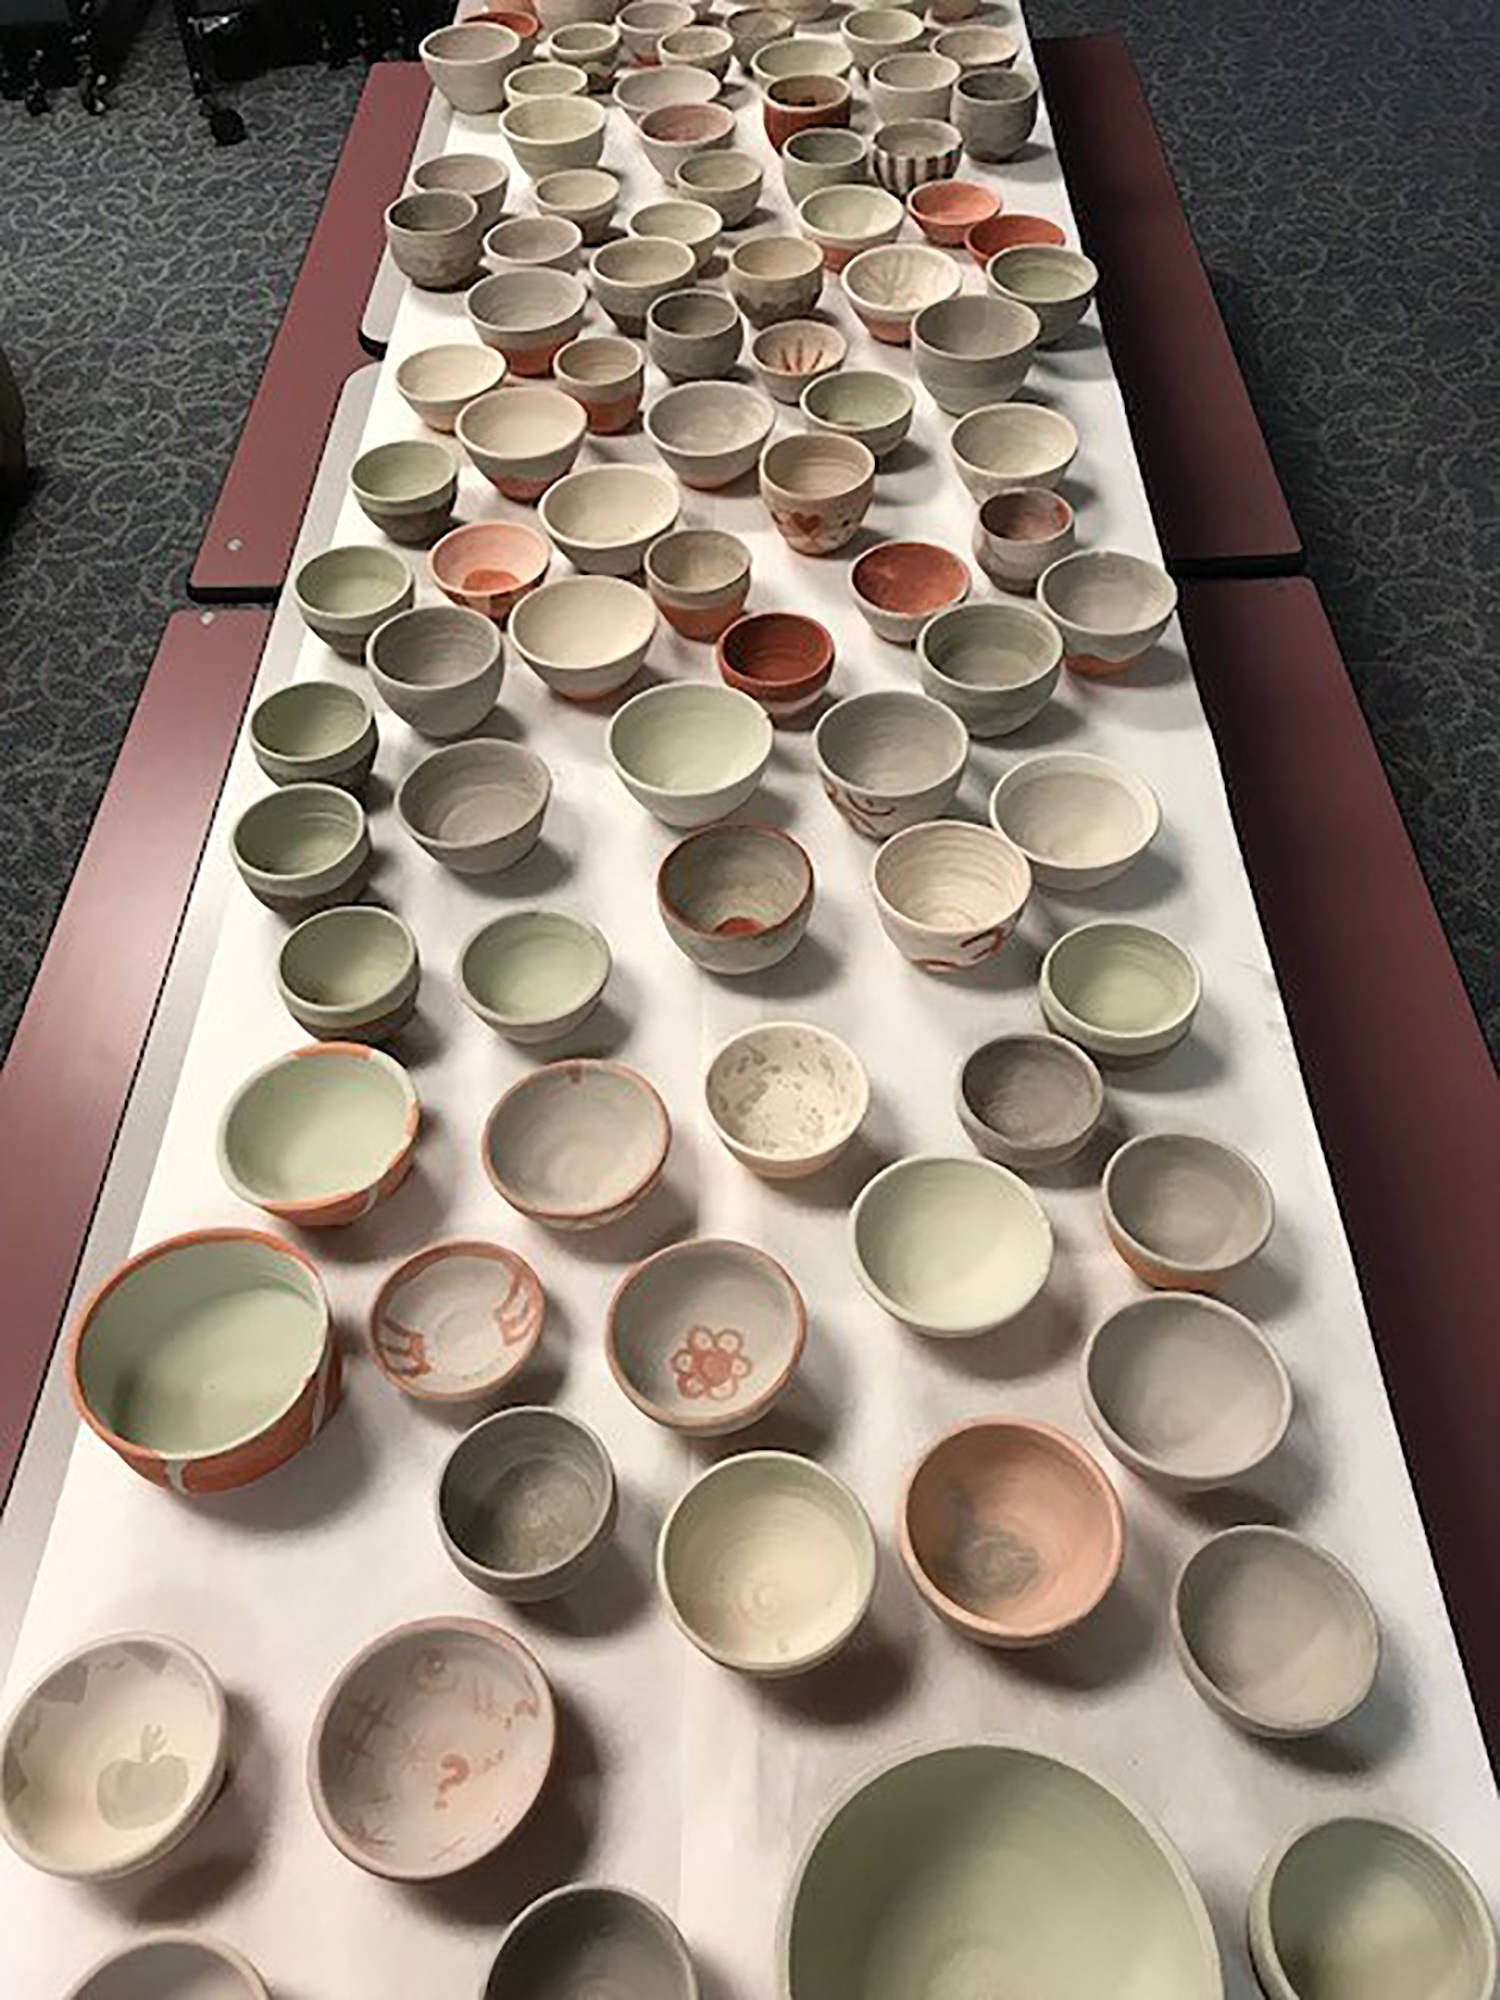 Participants can have lunch and take home a handmade ceramic bowl at the Jan. 23 fundraiser. COURTESY PHOTO